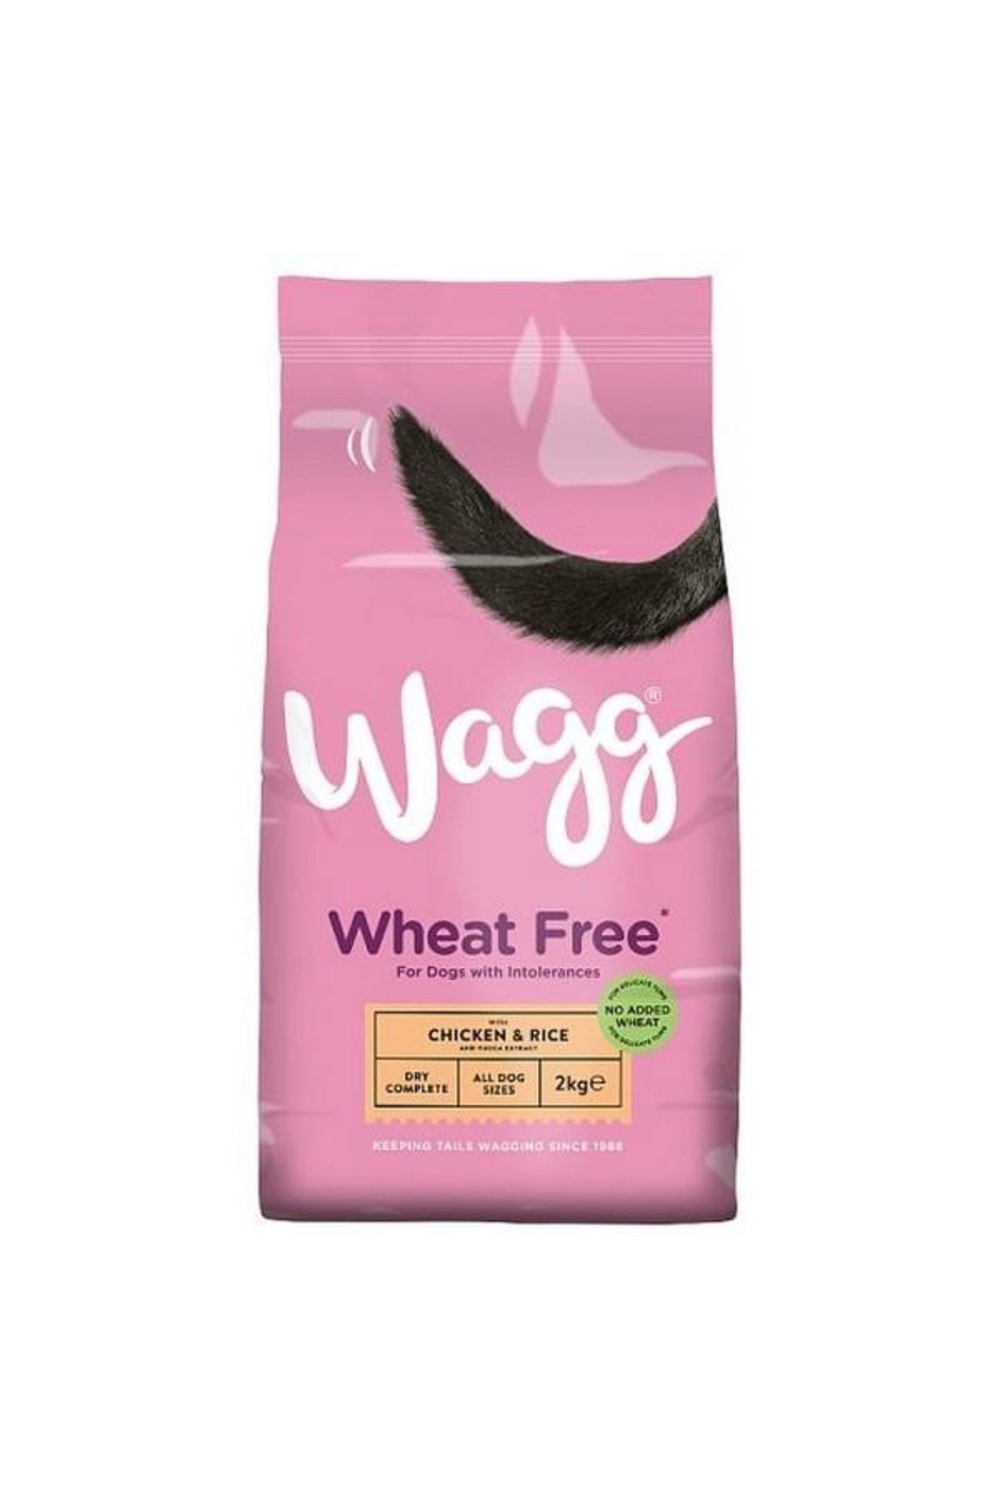 Wagg Wheat Free Chicken & Rice Dry Dog Food (May Vary) (4.4lbs)